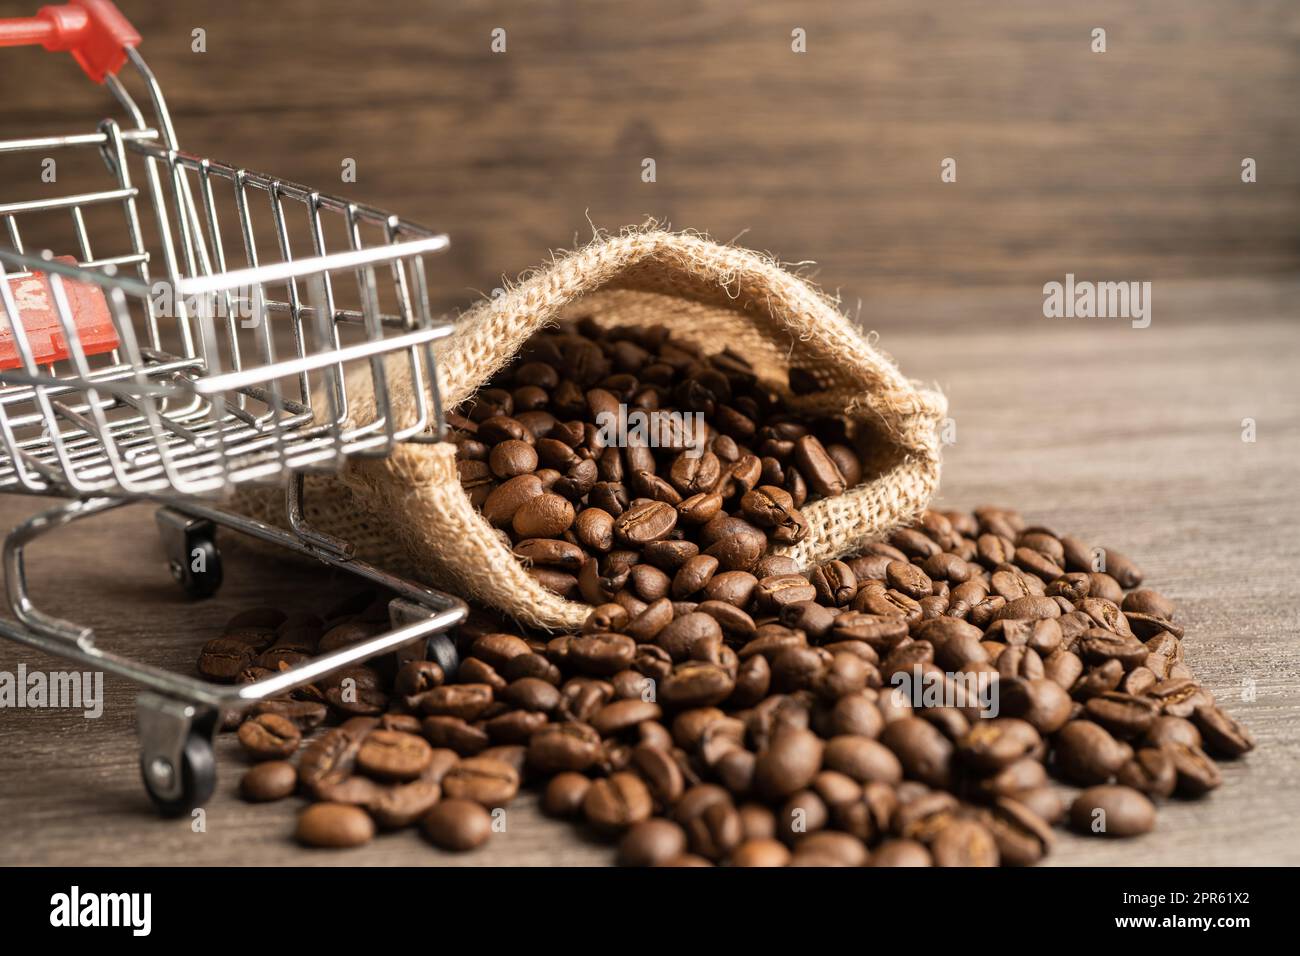 Box with shopping cart on coffee beans, Import Export Shopping online or eCommerce delivery service store product shipping, trade, supplier concept. Stock Photo